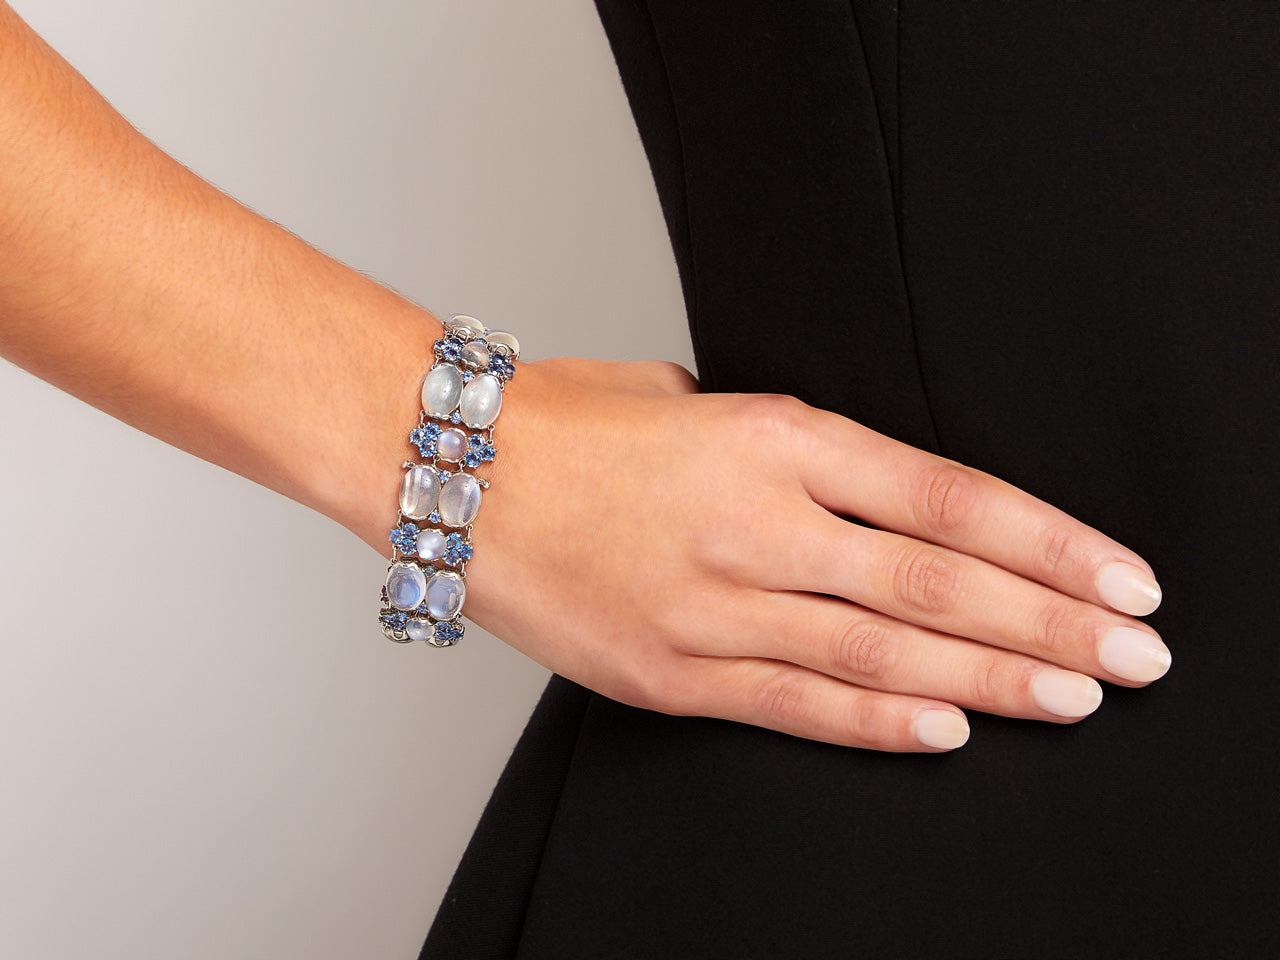 Tiffany & Co. Moonstone and Montana Sapphire Bracelet in Platinum, by Louis Comfort Tiffany